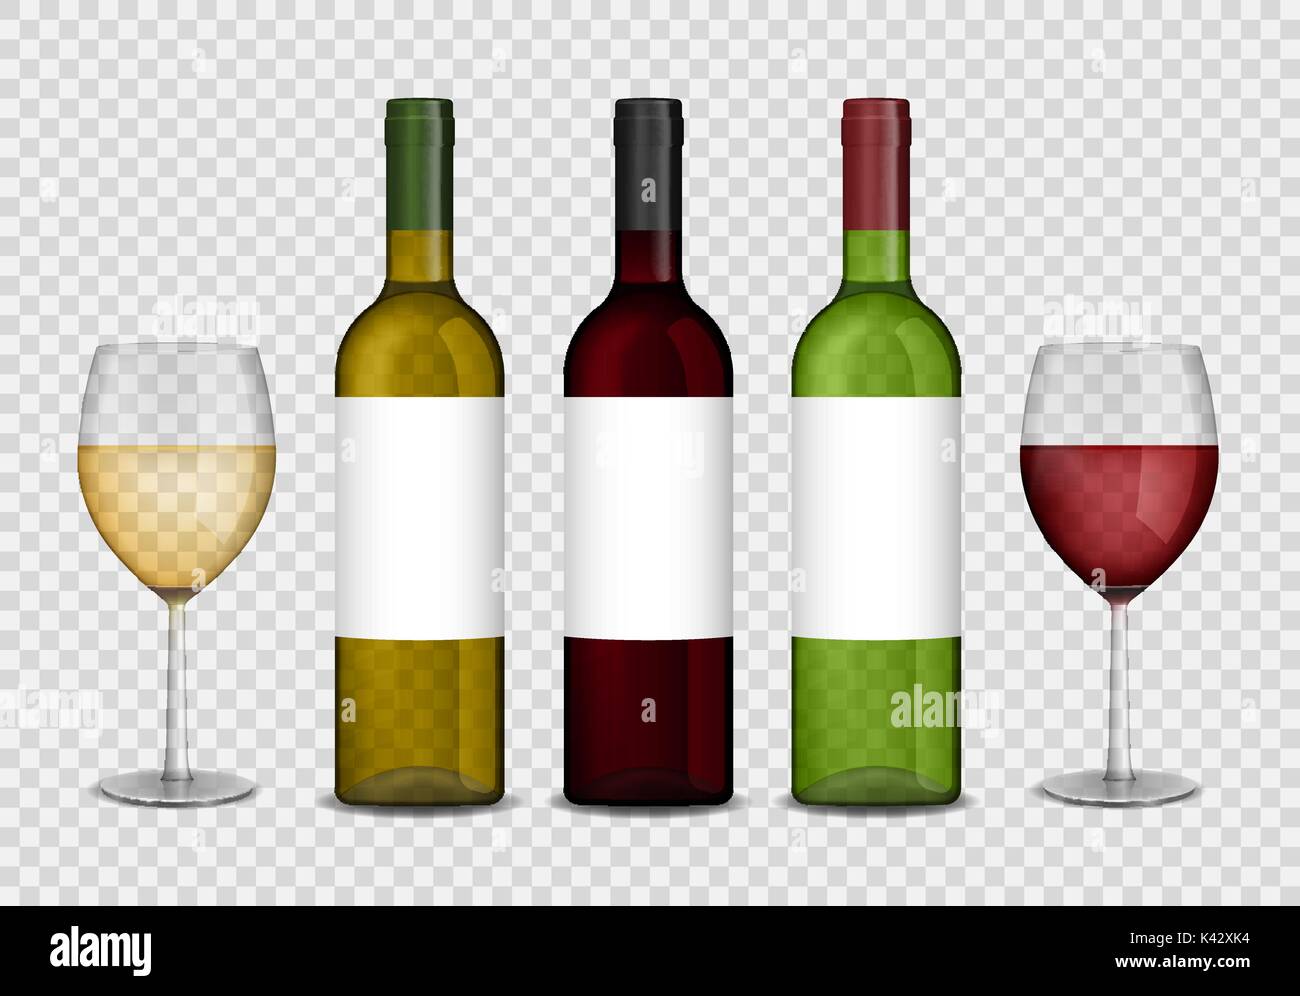 Transparent wine bottles and wineglasses mockup. red and white wine in bottle and glasses isolated. Vector illustration. Stock Vector